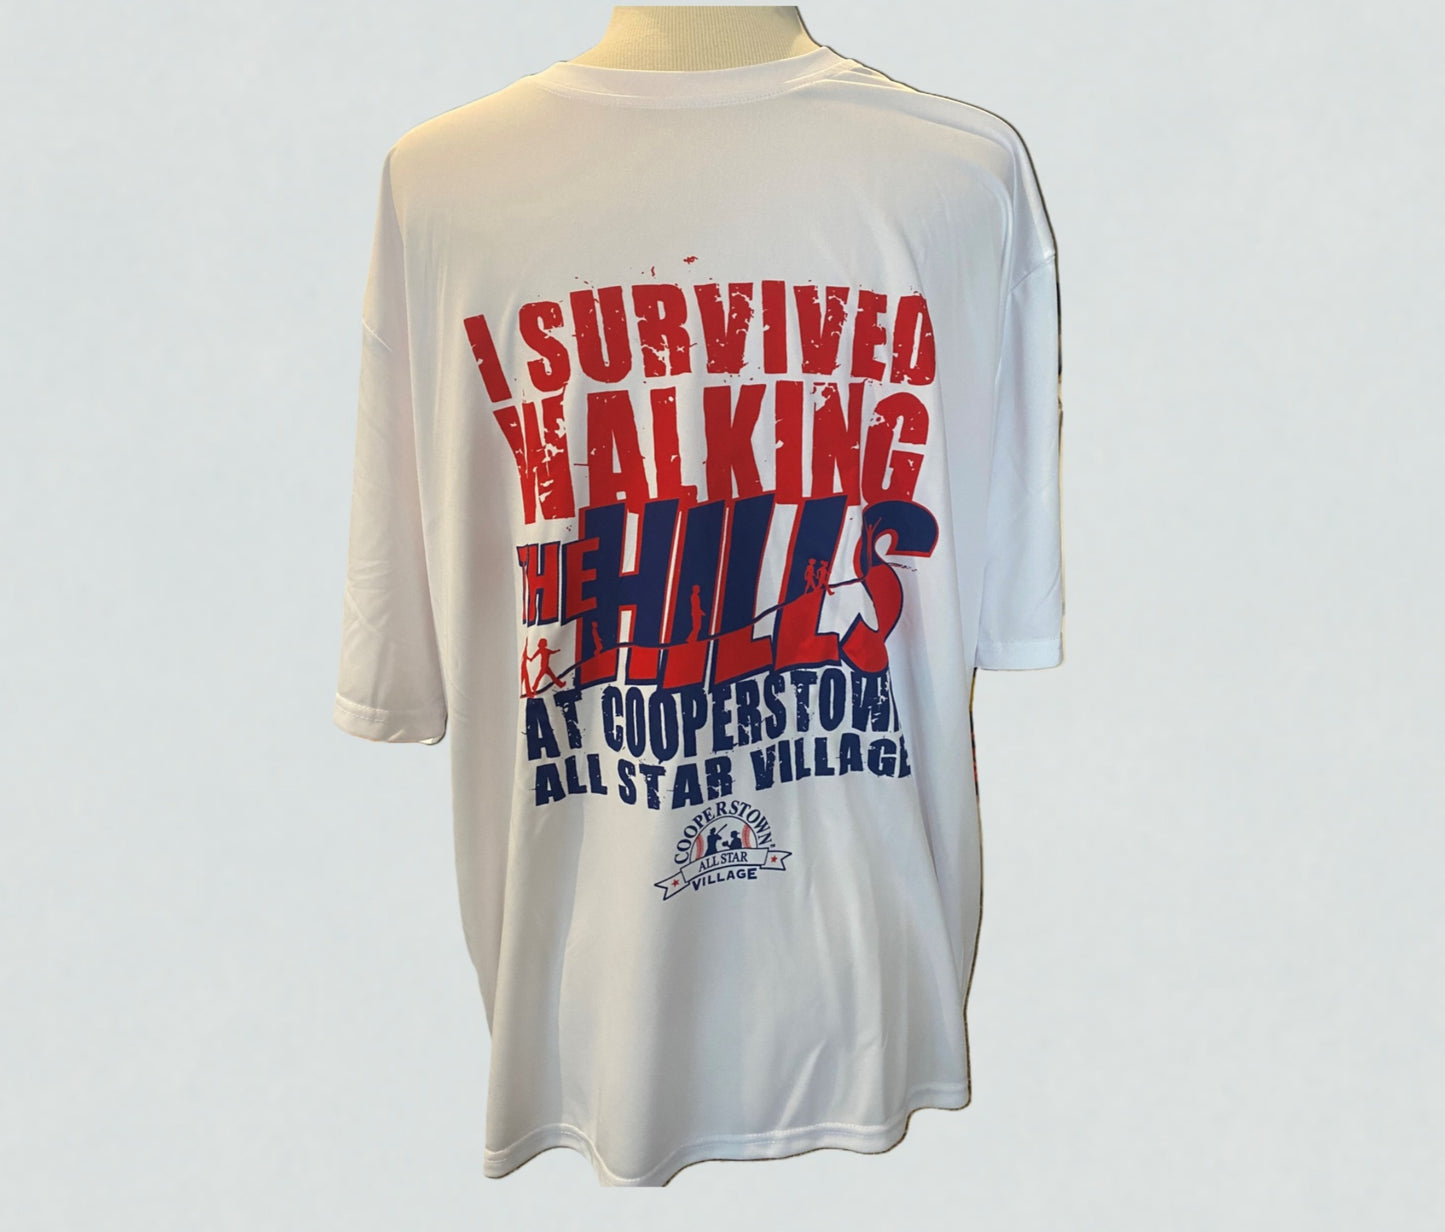 I survived walking the hills at Cooperstown All Star Village Dri-Fit T-shirt